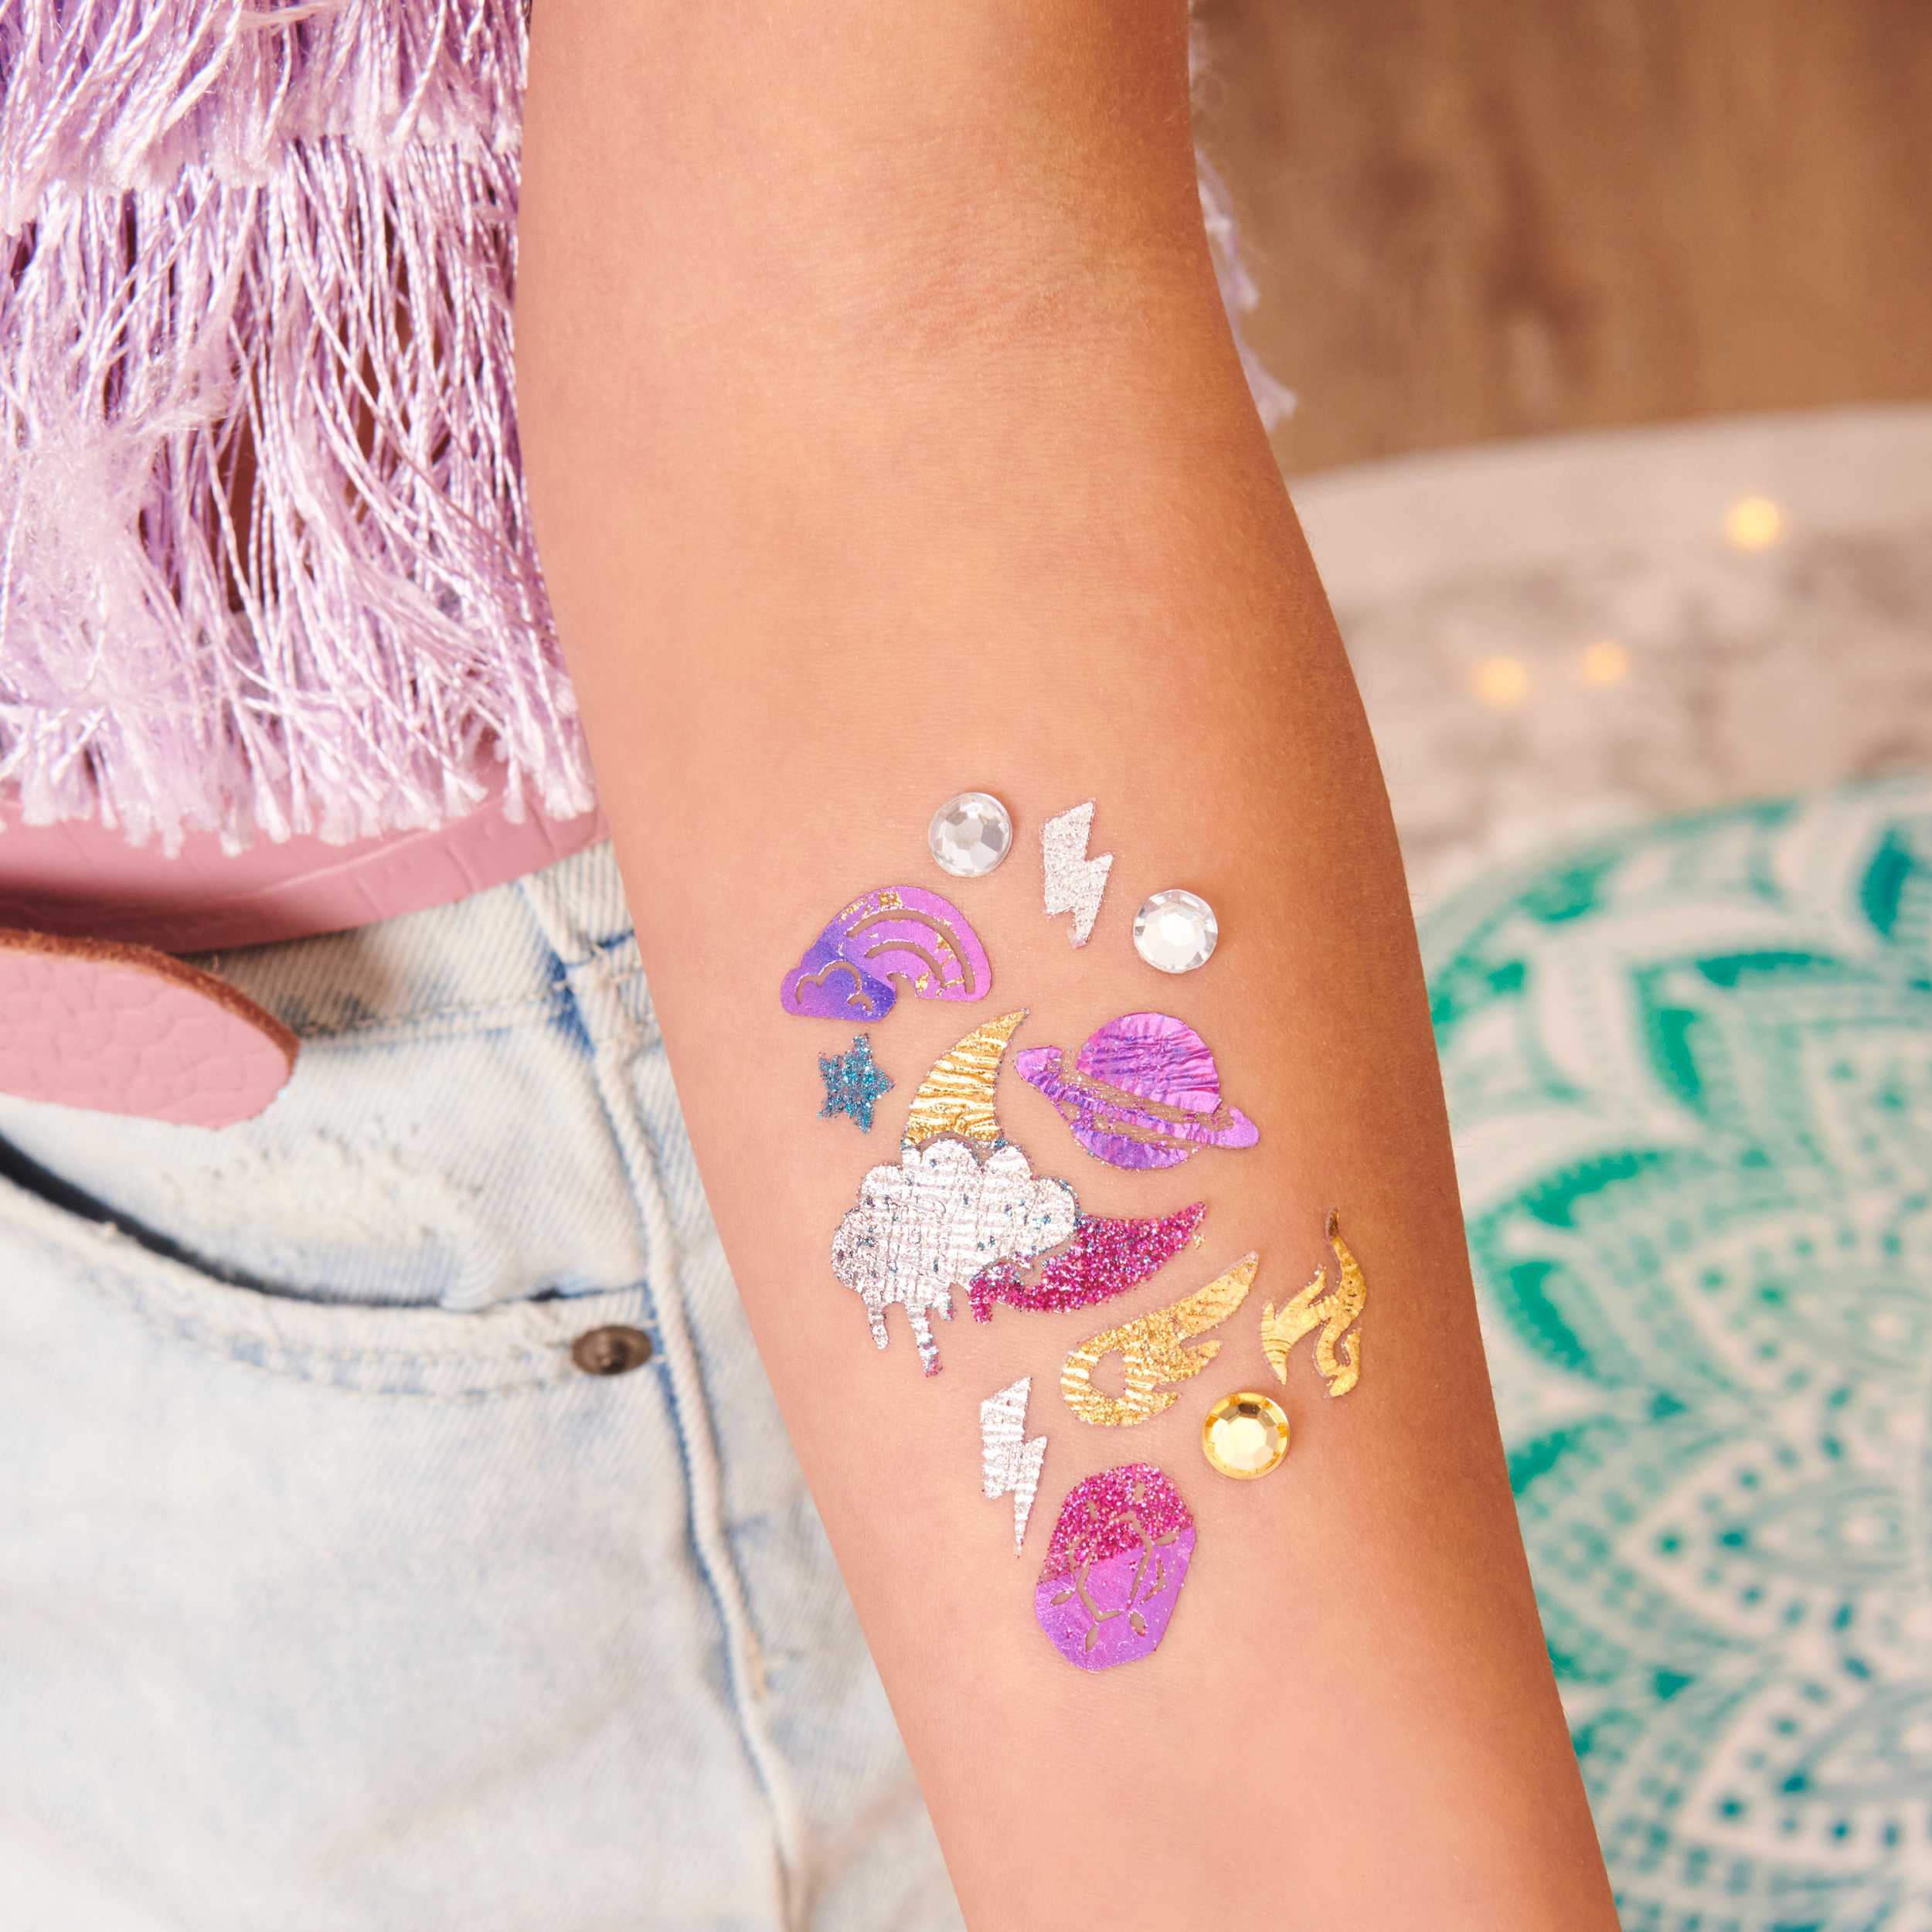 Shimmer Me Body Art with Roller